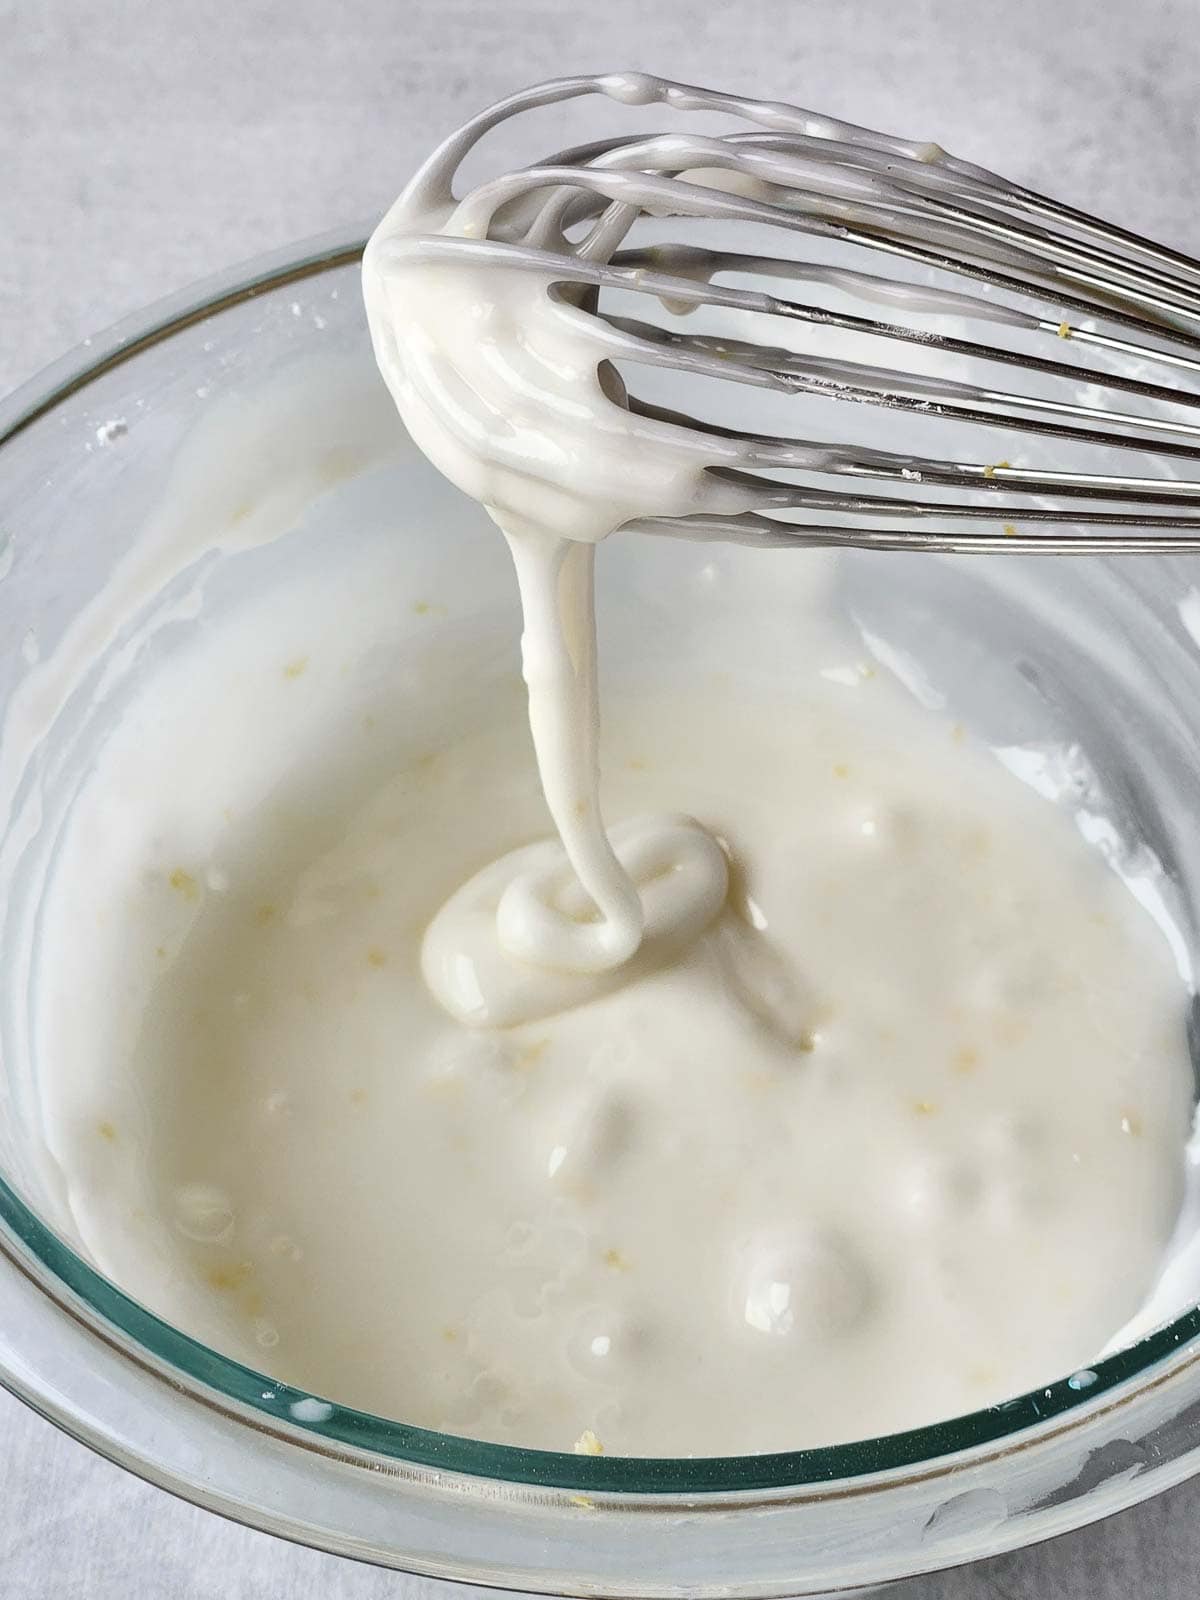 White icing dripping off a whisk into a bowl.